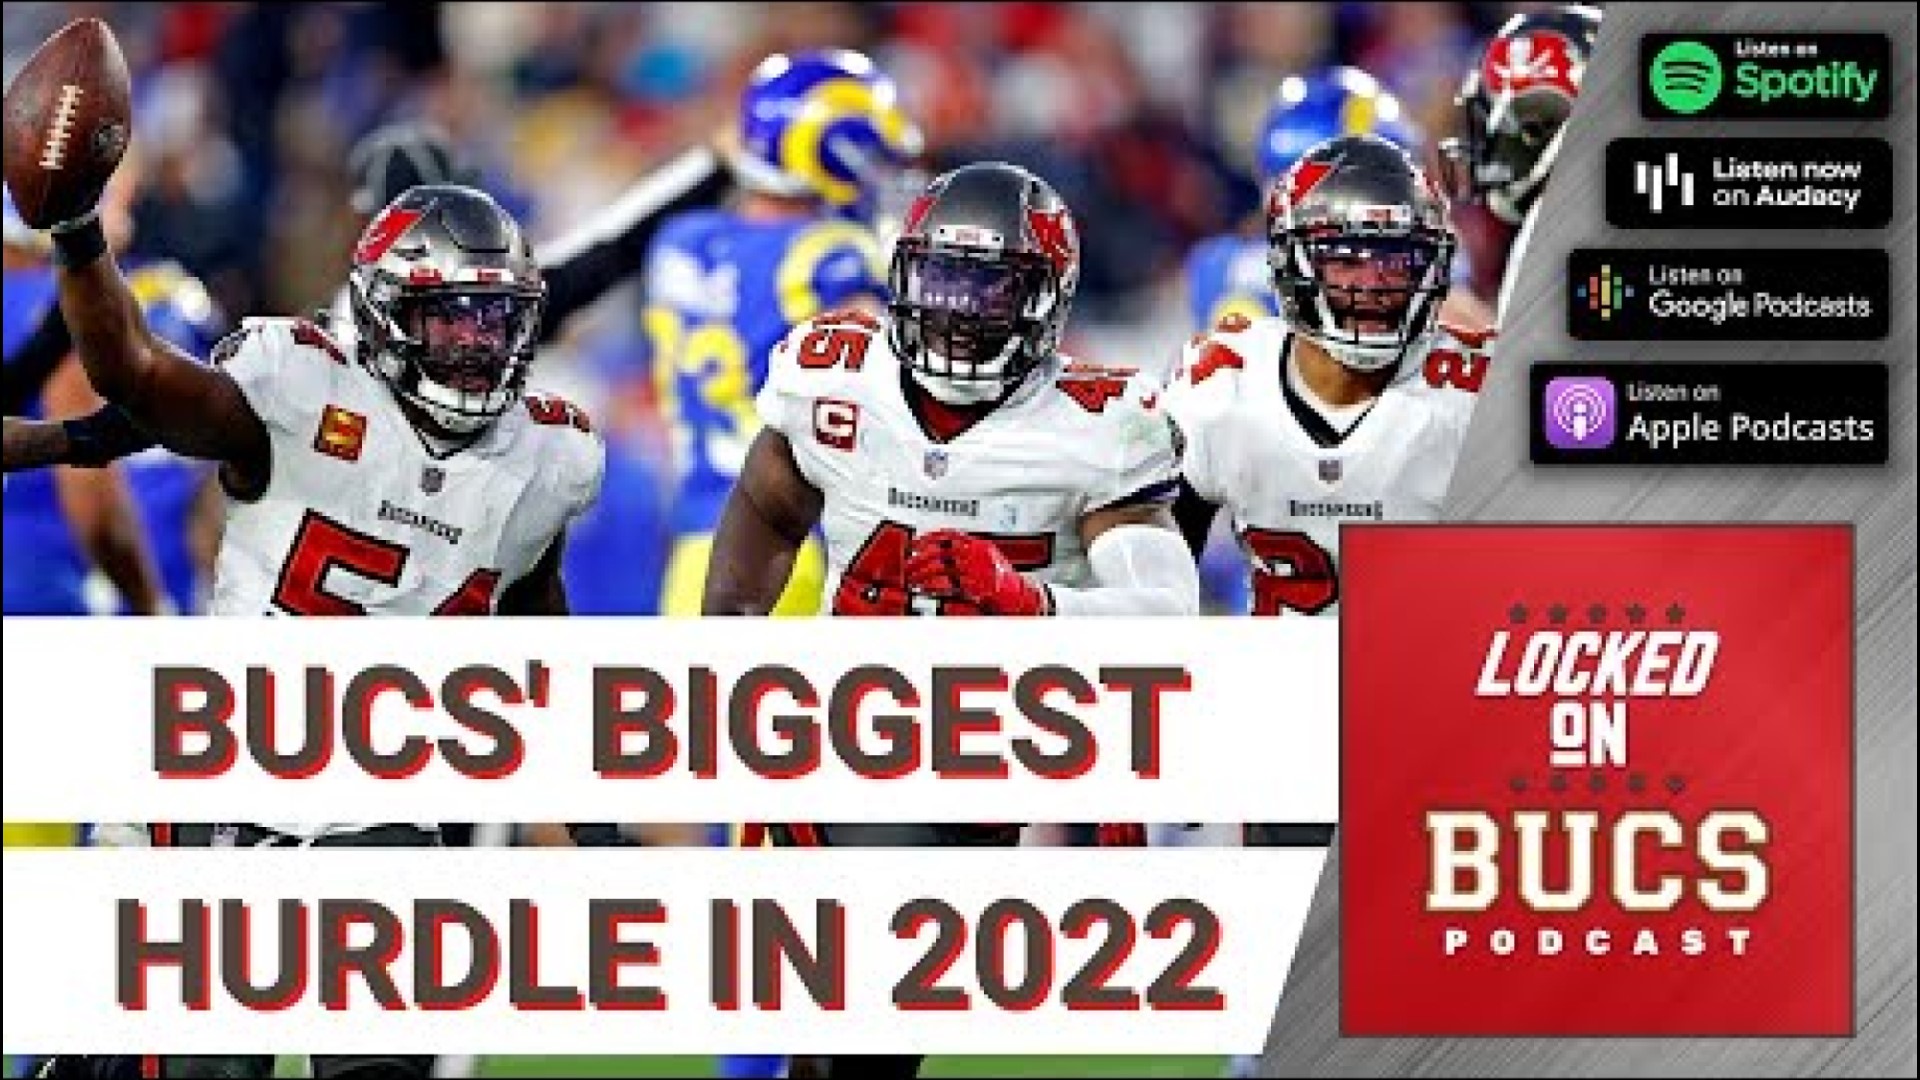 The Buccaneers have faced their share of obstacles, but what is the biggest hurdle they have to get over if they are going to send Tom Brady out as a champion?